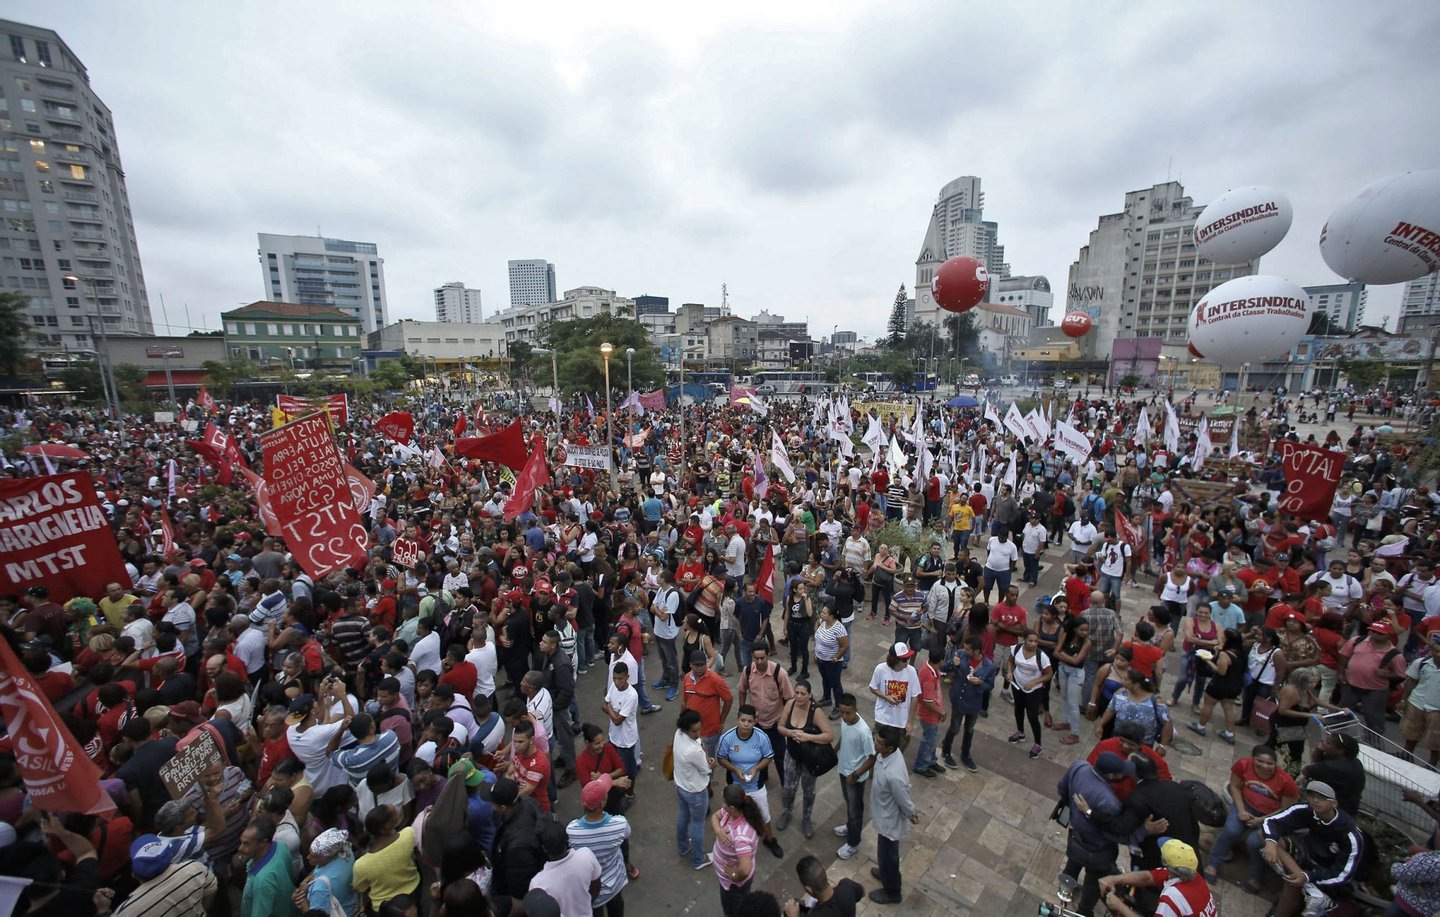 Members of the Landless Workers Movement (MTST) take part in a demonstration in Sao Paulo, Brazil on March 24, 2016. An MTST demonstration to defend a program of reforms, the demilitarization of the police and democracy took place Thursday in Sao Paulo. AFP PHOTO / Miguel SCHINCARIOL / AFP / Miguel Schincariol (Photo credit should read MIGUEL SCHINCARIOL/AFP/Getty Images)